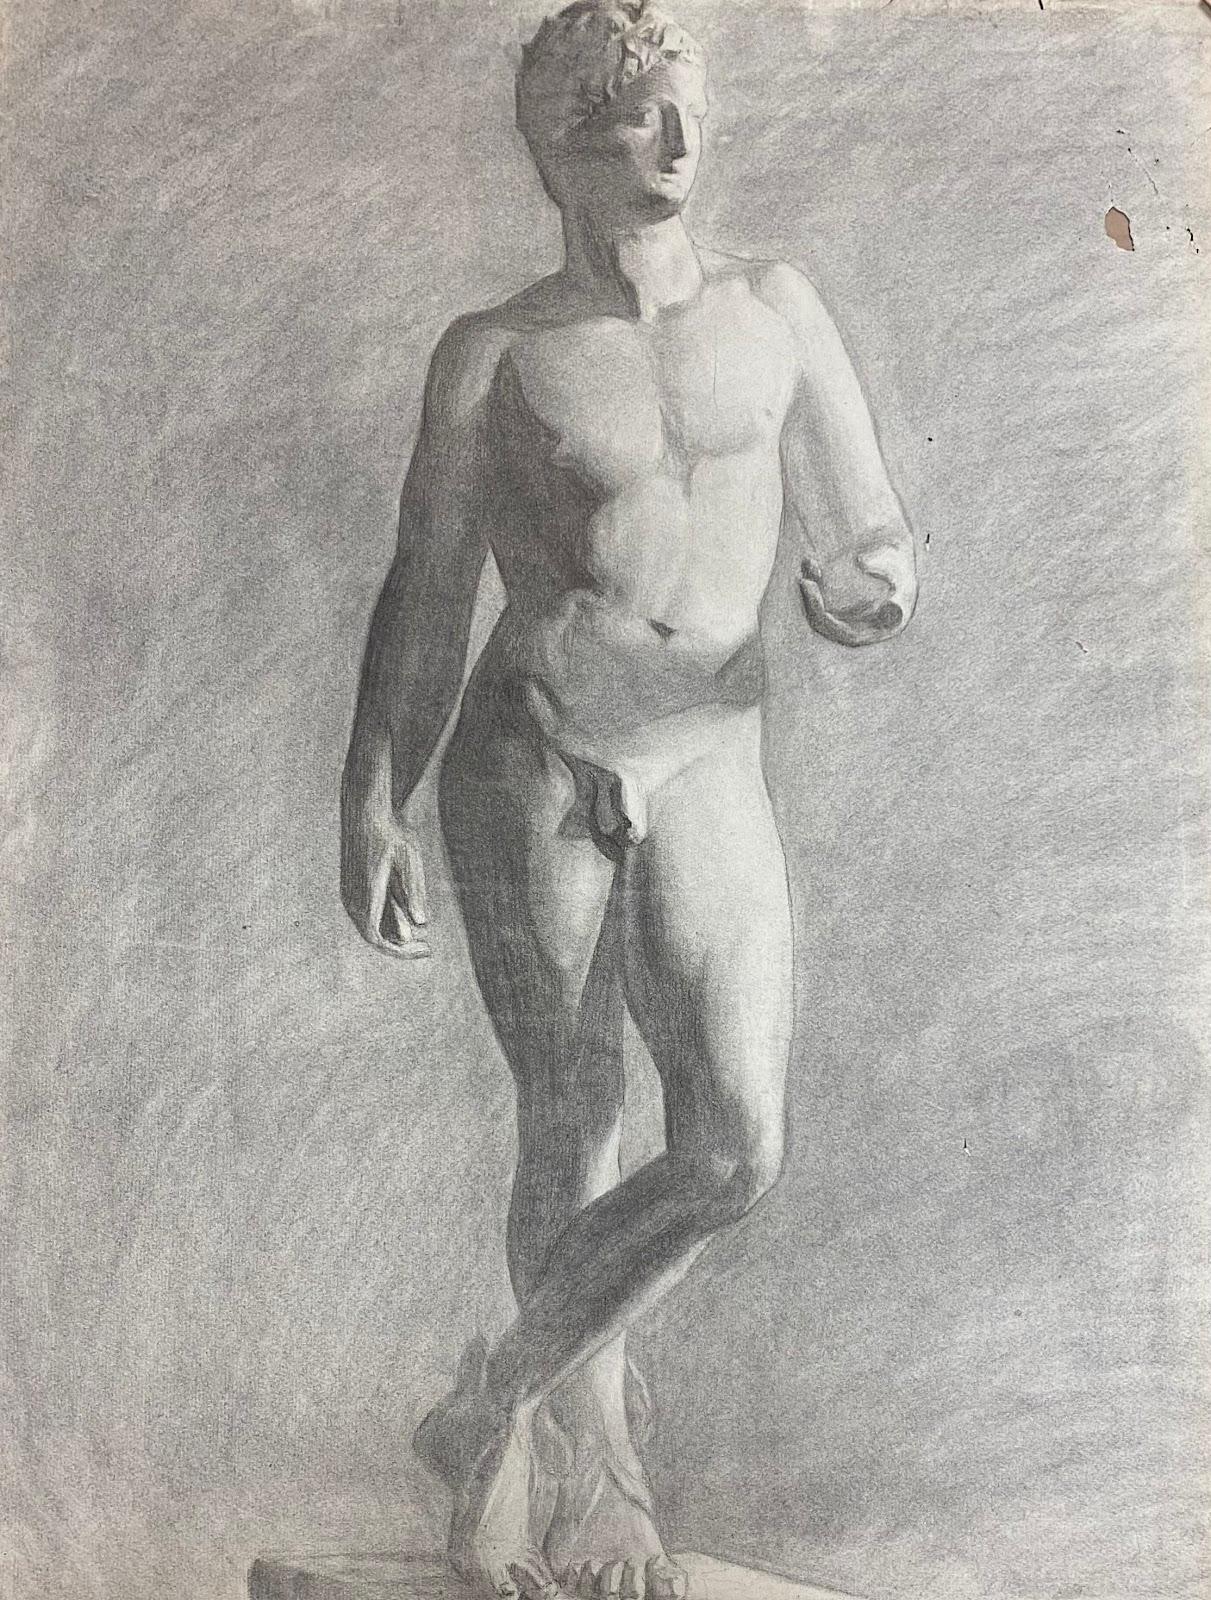 1900s French Atelier Academic Drawing Portrait of Classical Male Nude Sculpture - Art by Jeanne Nachat